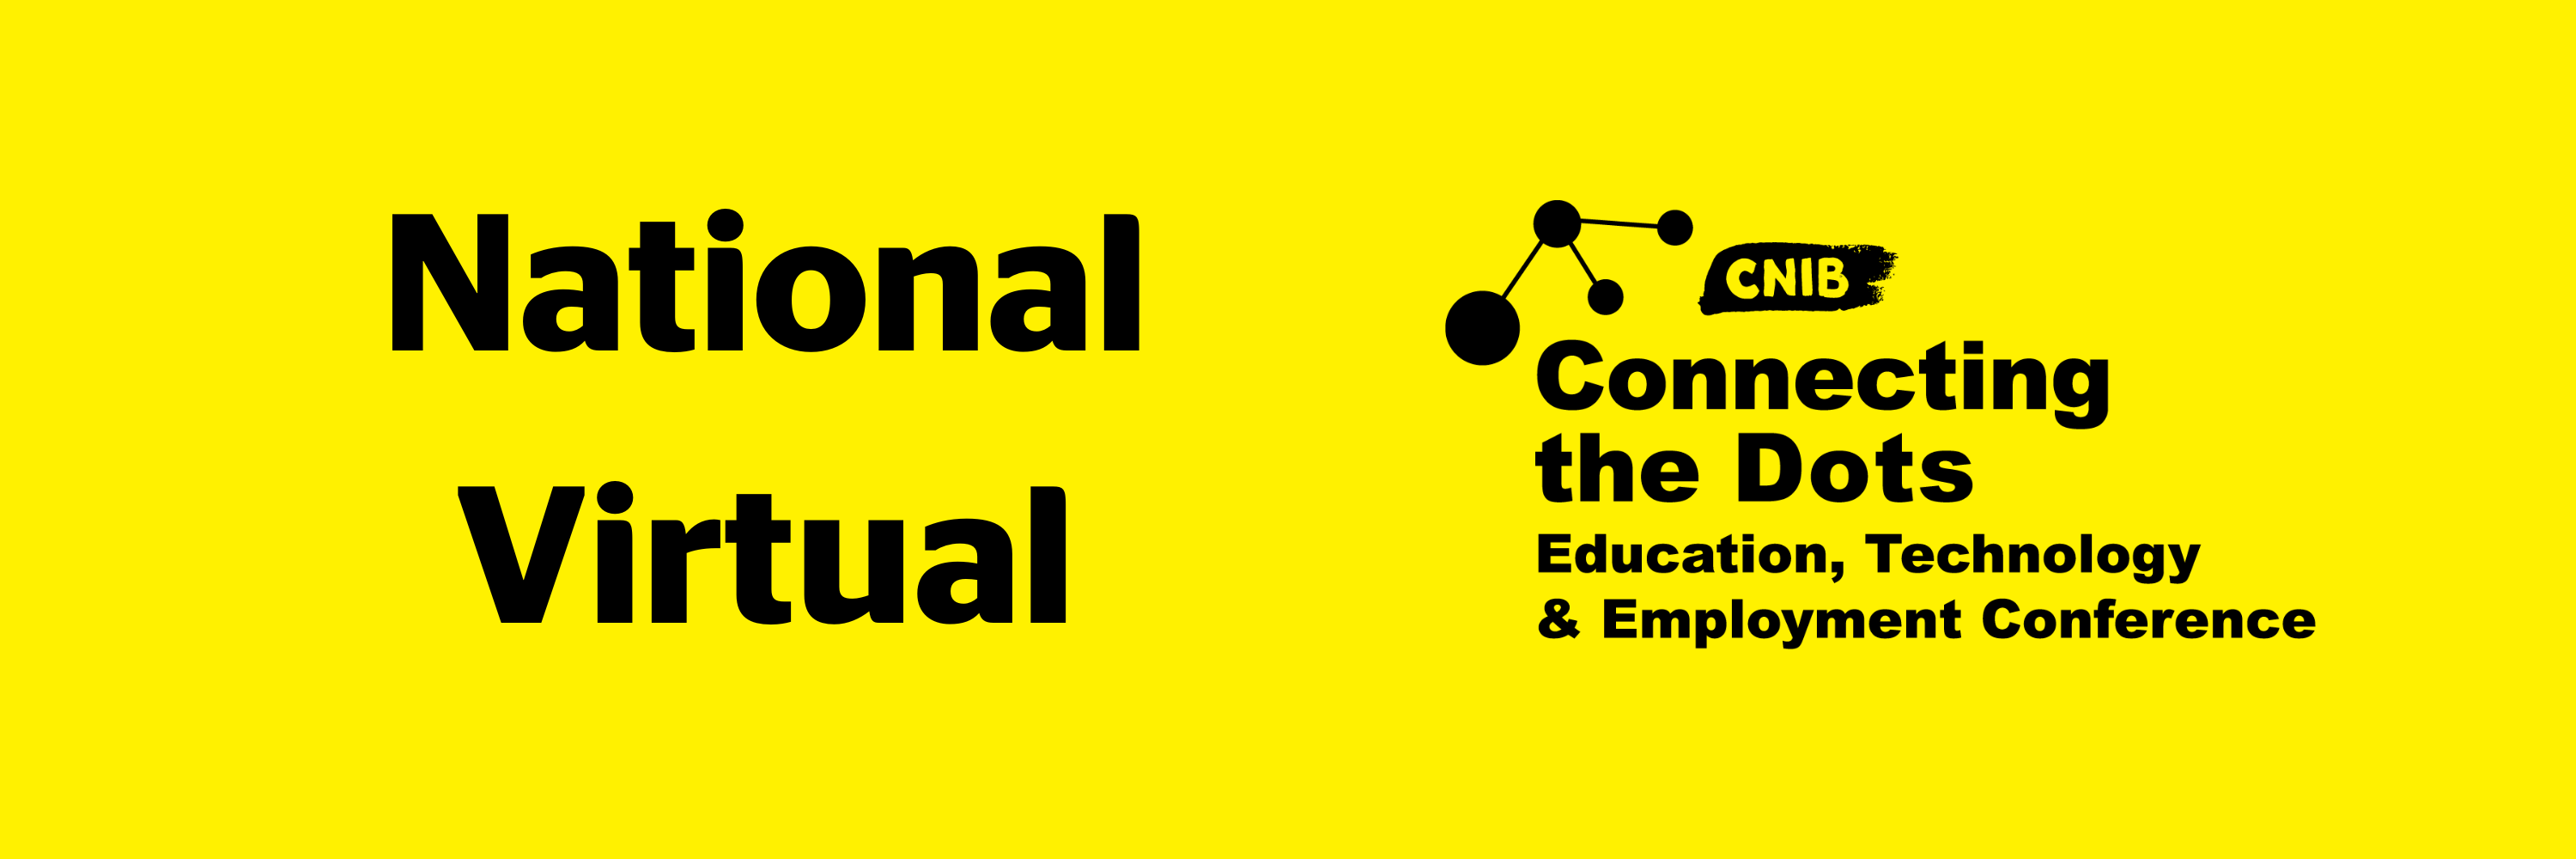 National Virtual Connecting the Dots